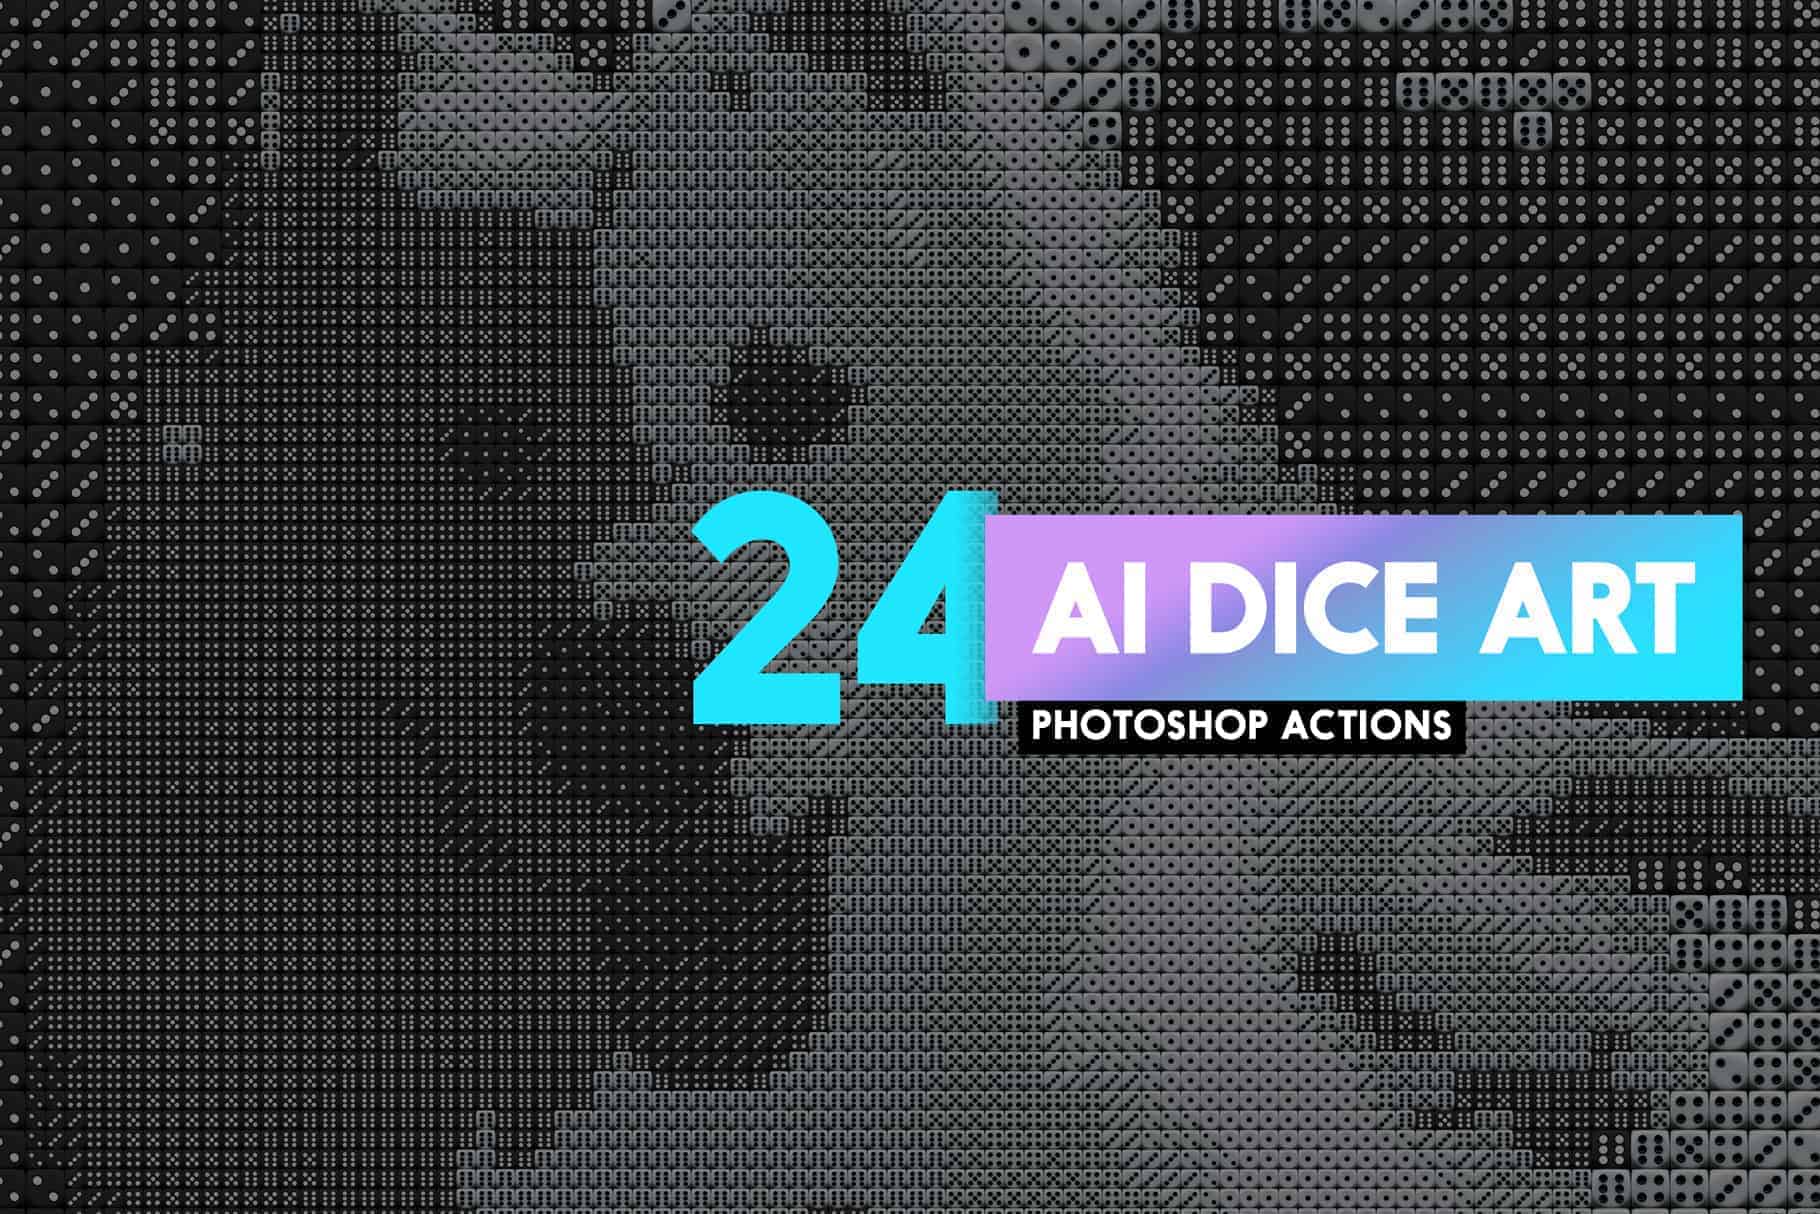 Create Art Made From Thousands of Dice with 4 Free Photoshop Actions